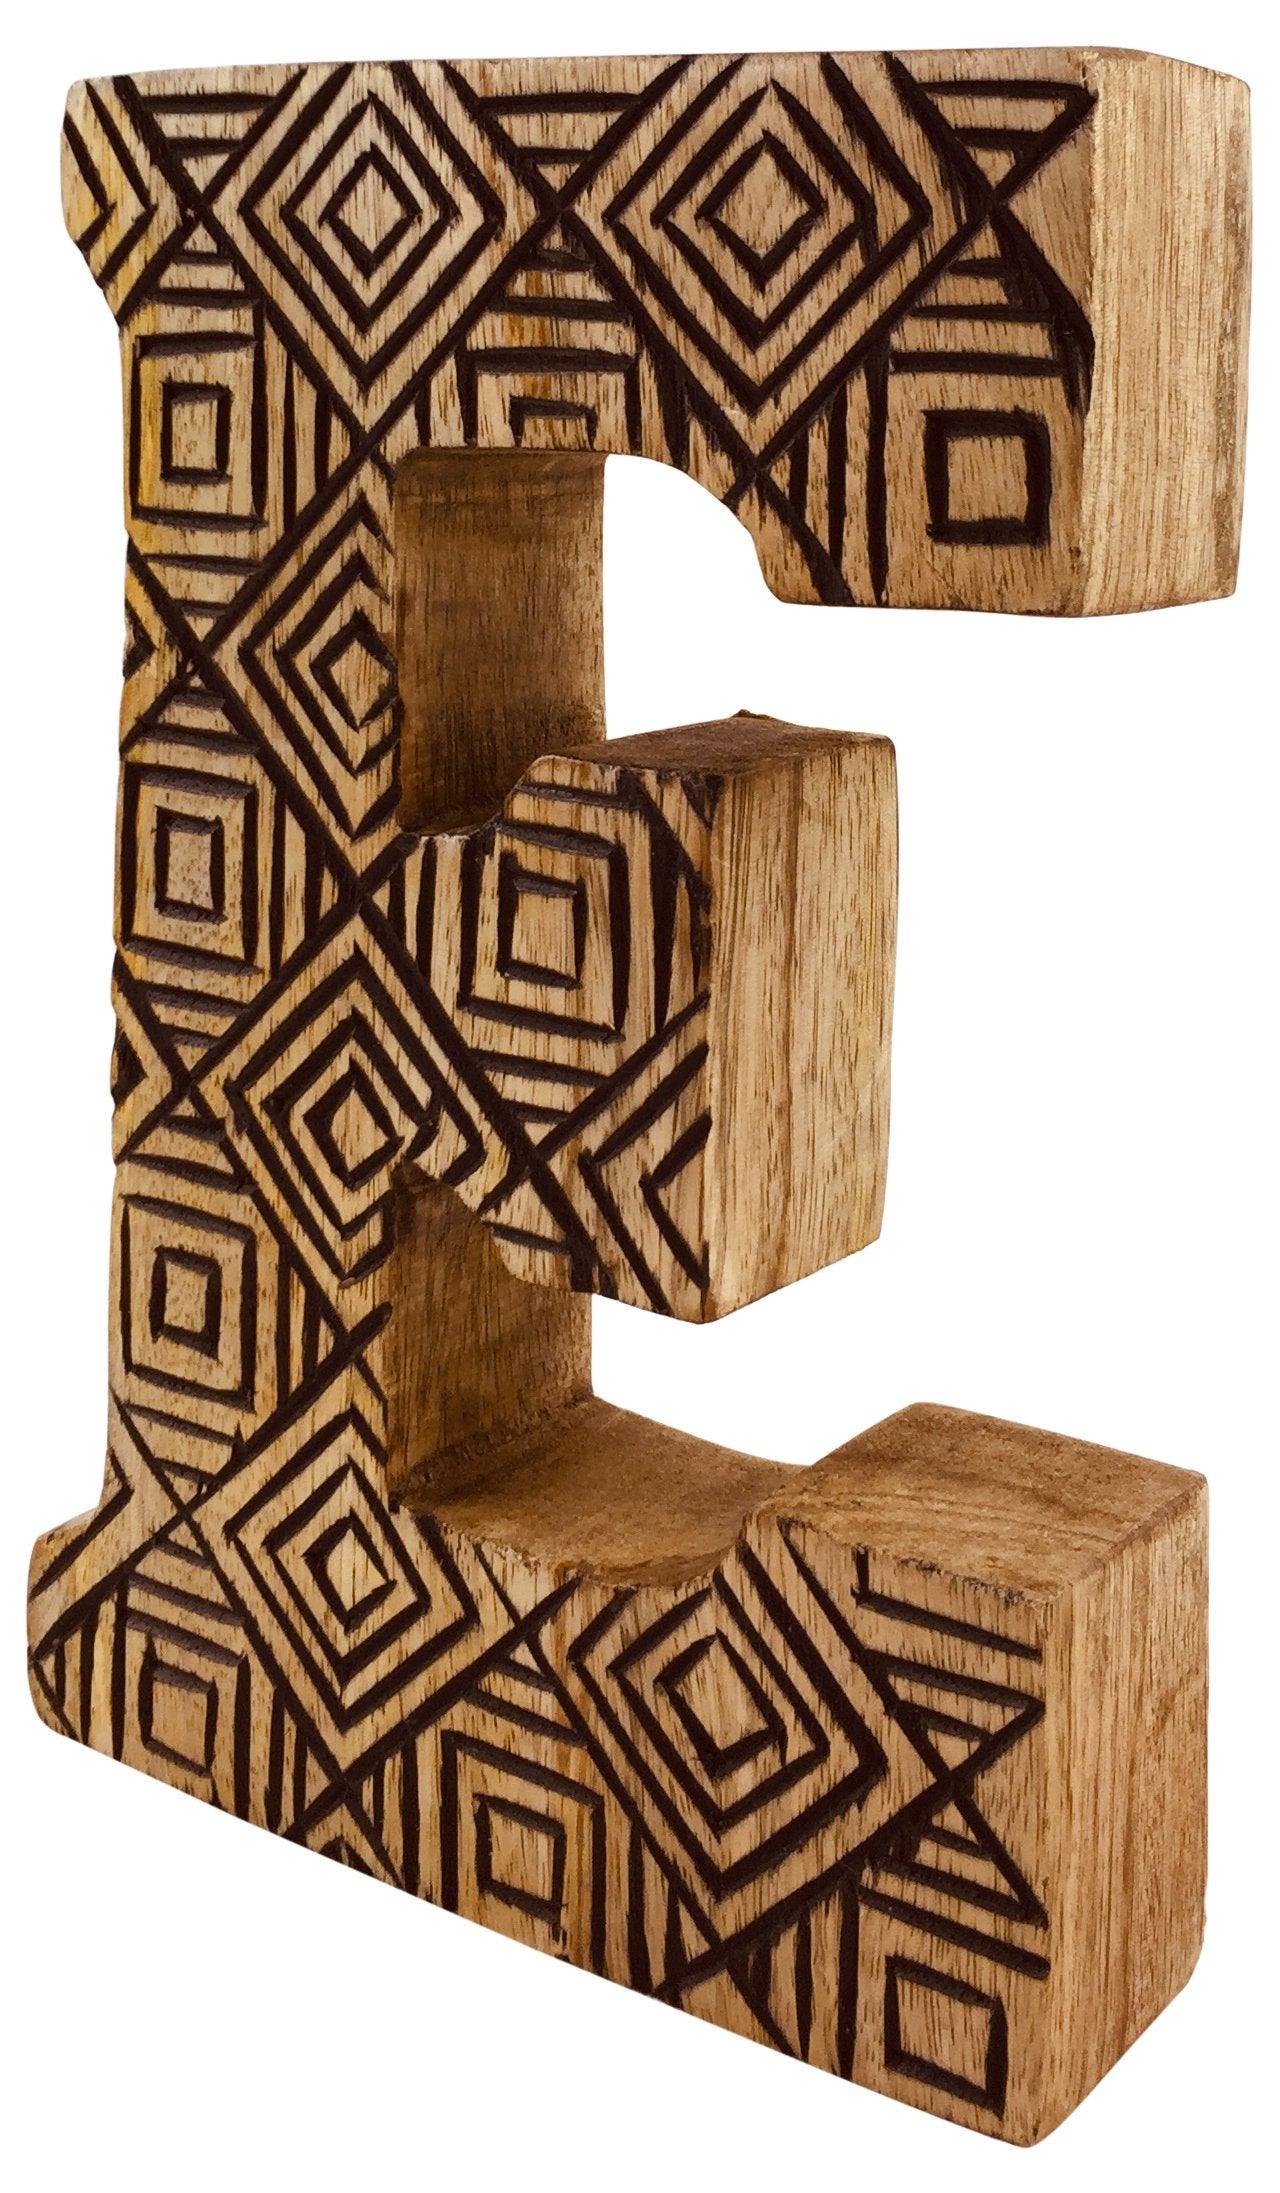 Hand Carved Wooden Geometric Letter E - £12.99 - Single Letters 